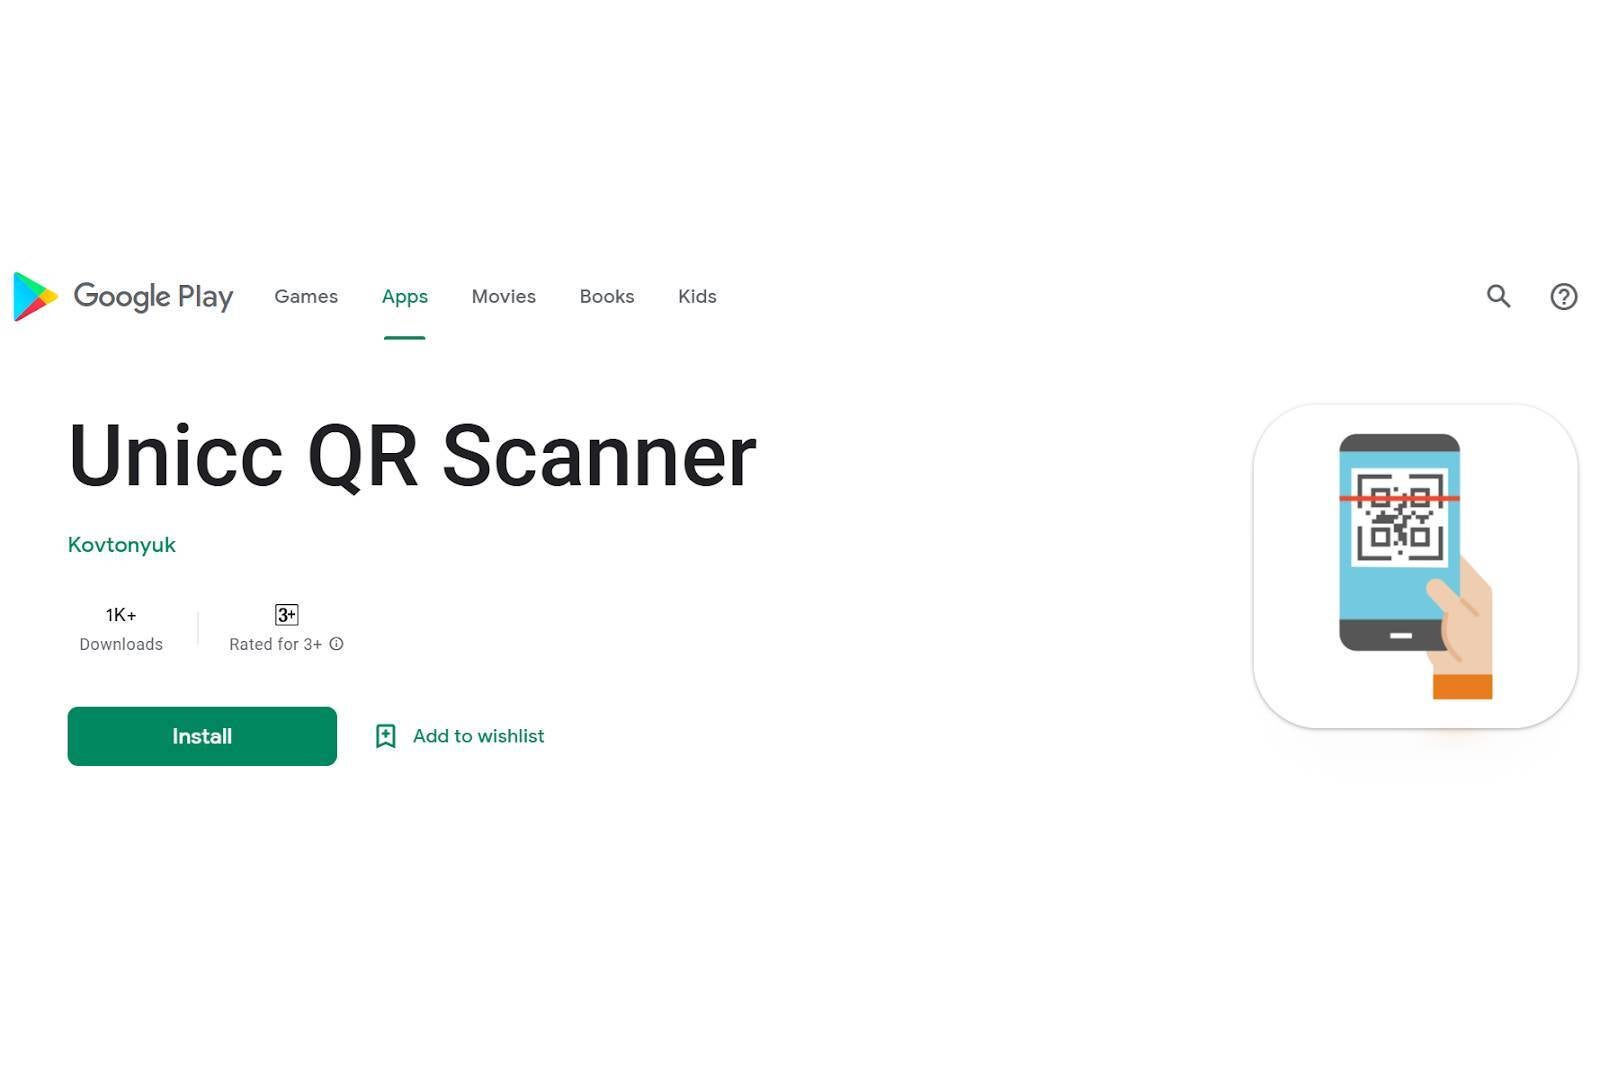 Unicc QR Scanner with Coper malware on Play Store - Get rid of these apps with over 300,000 installs Google just launched play store to be dangerous